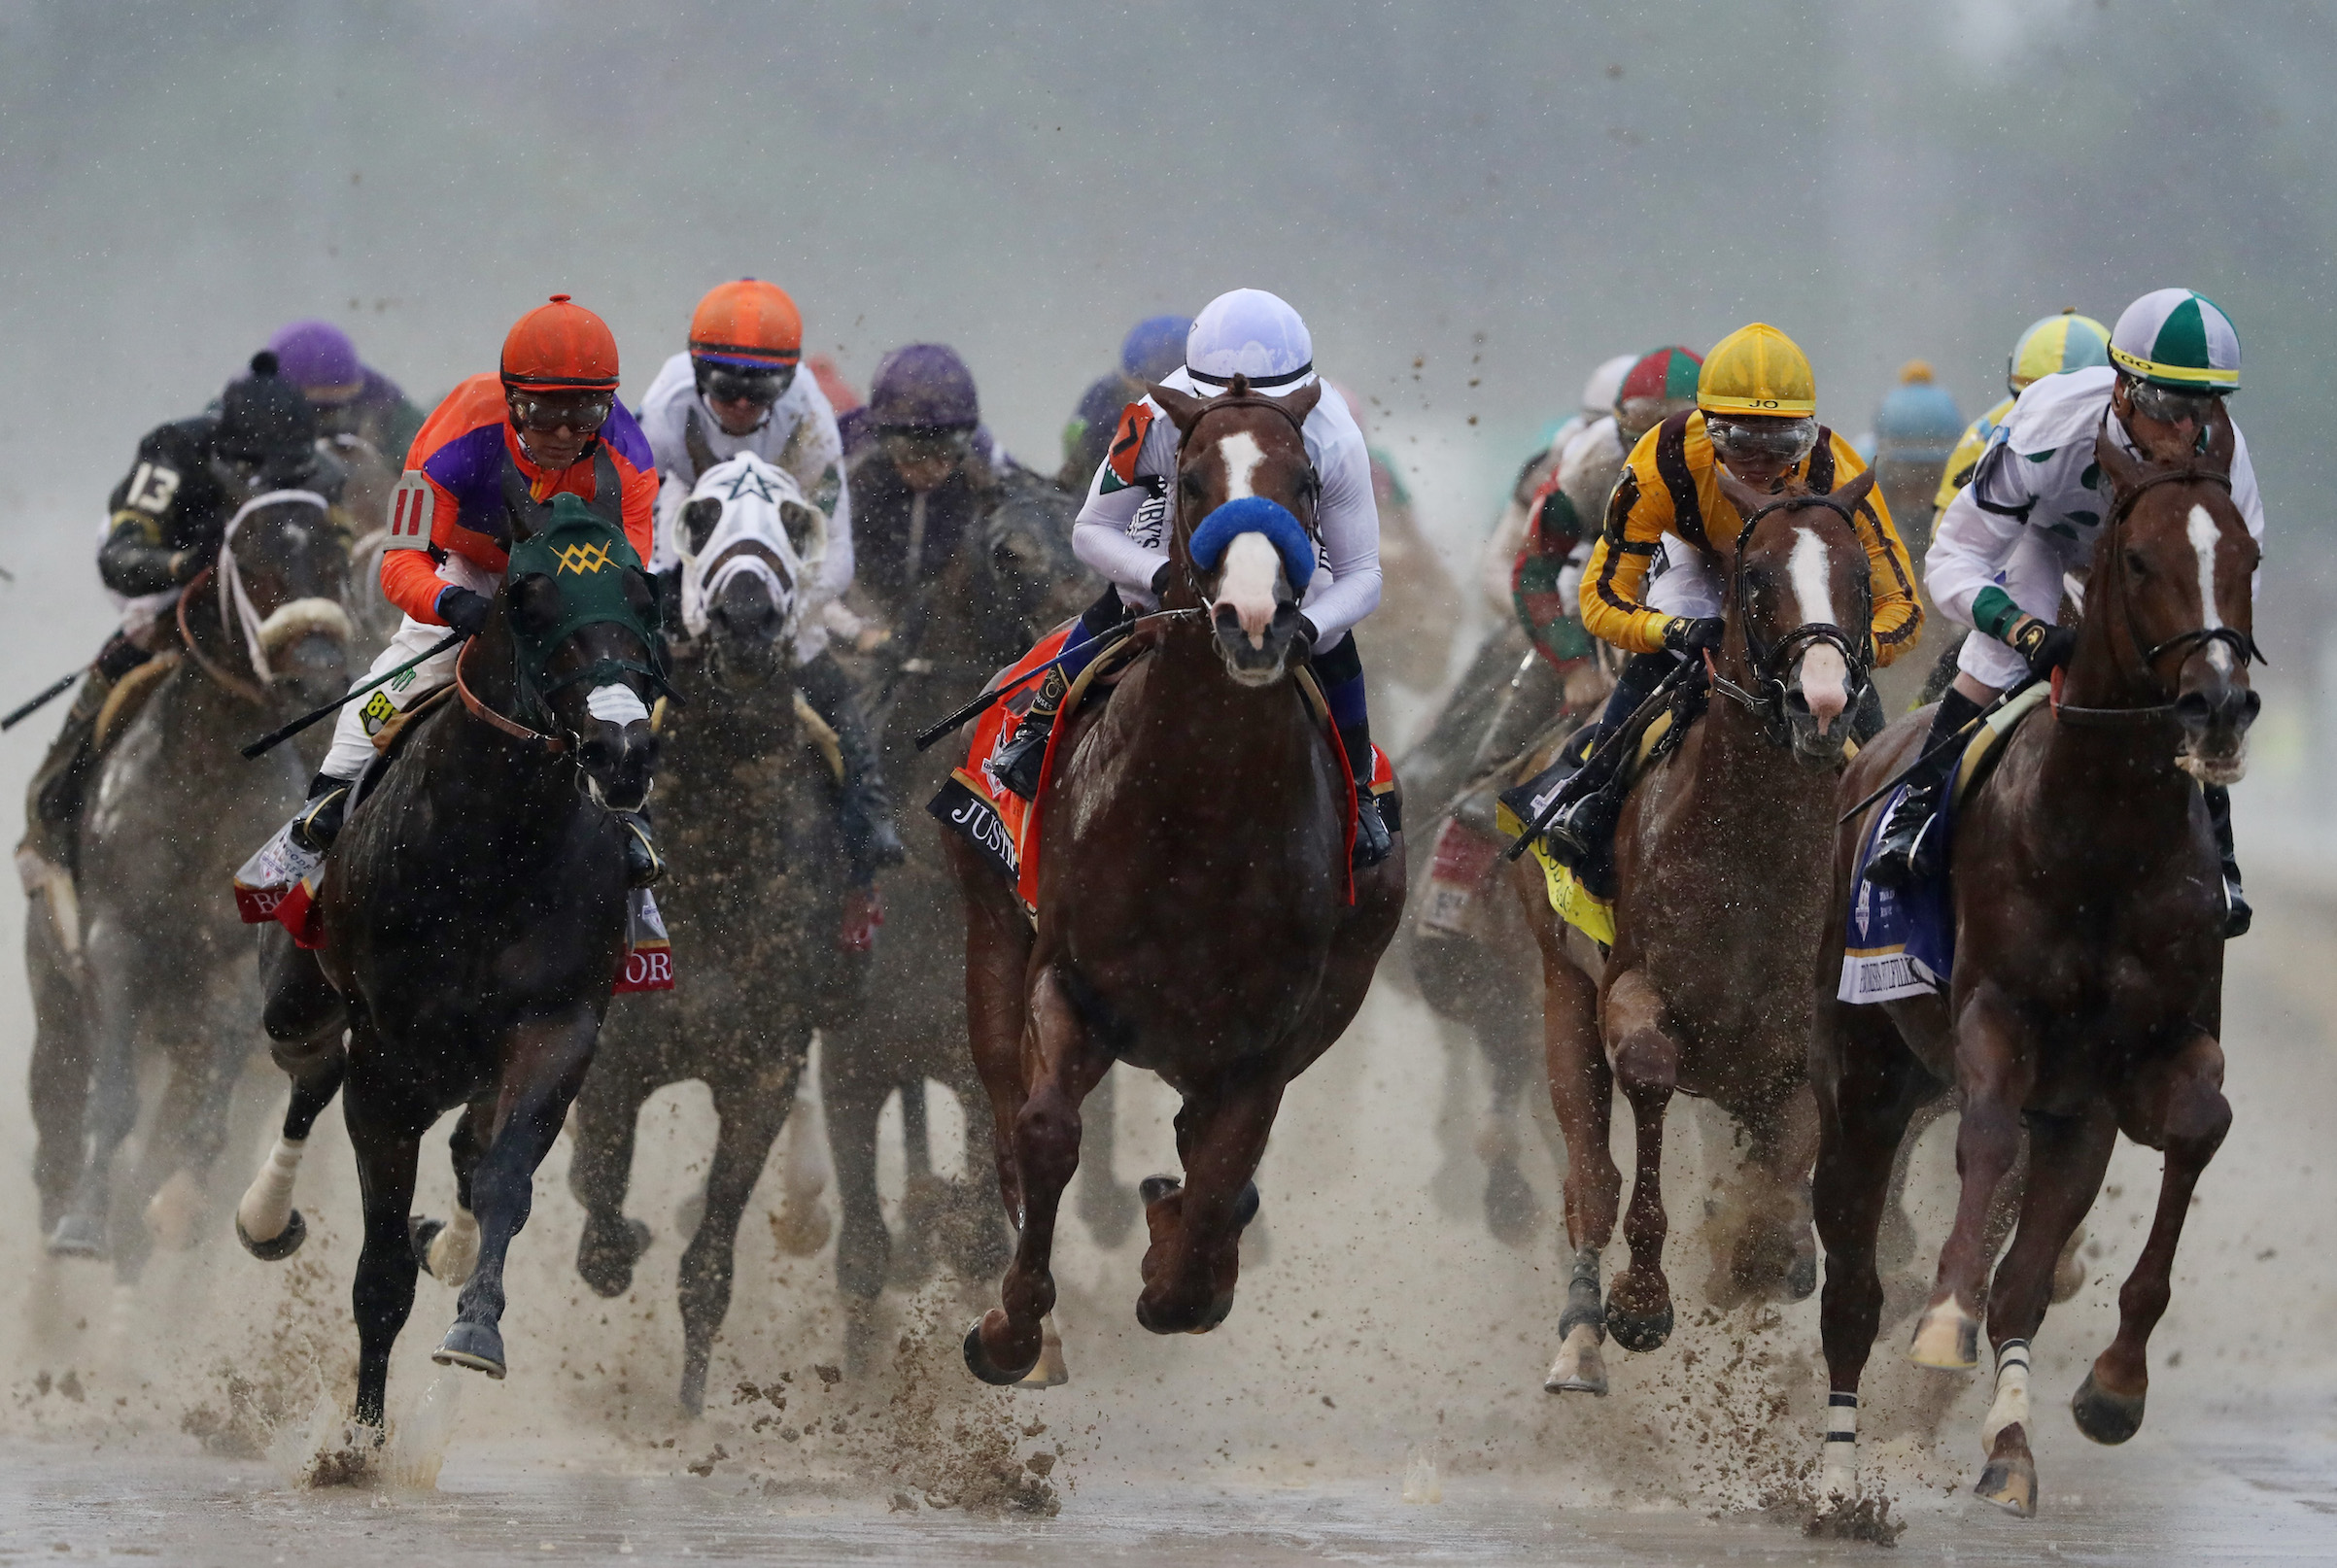 The 144th running of the Kentucky Derby at Churchill Downs on May 5, 2018 in Louisville, Ky. (Sean M. Haffey—Getty Images)